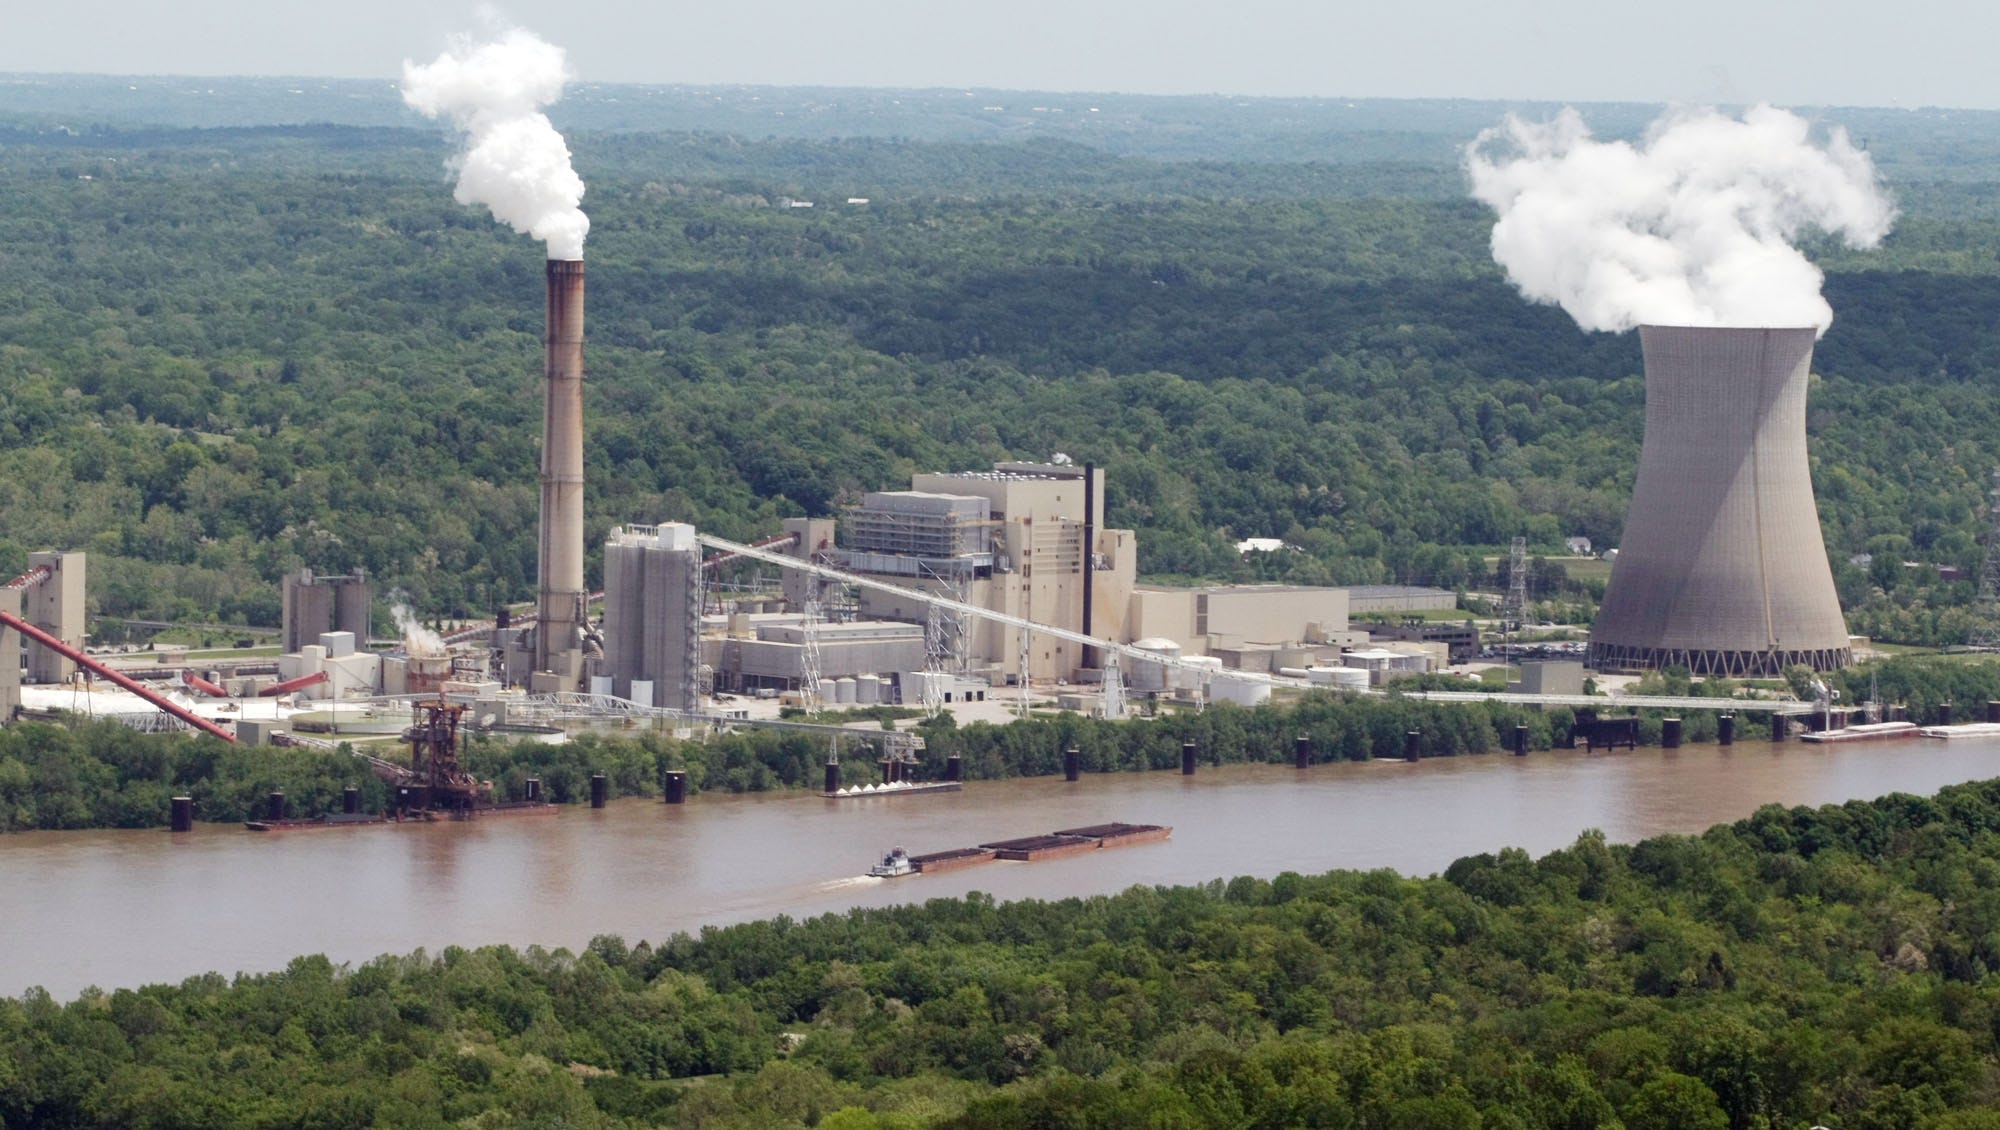  Coal-fueled Zimmer Power Plant in Ohio to shut down in 2022, earlier than previously announced 